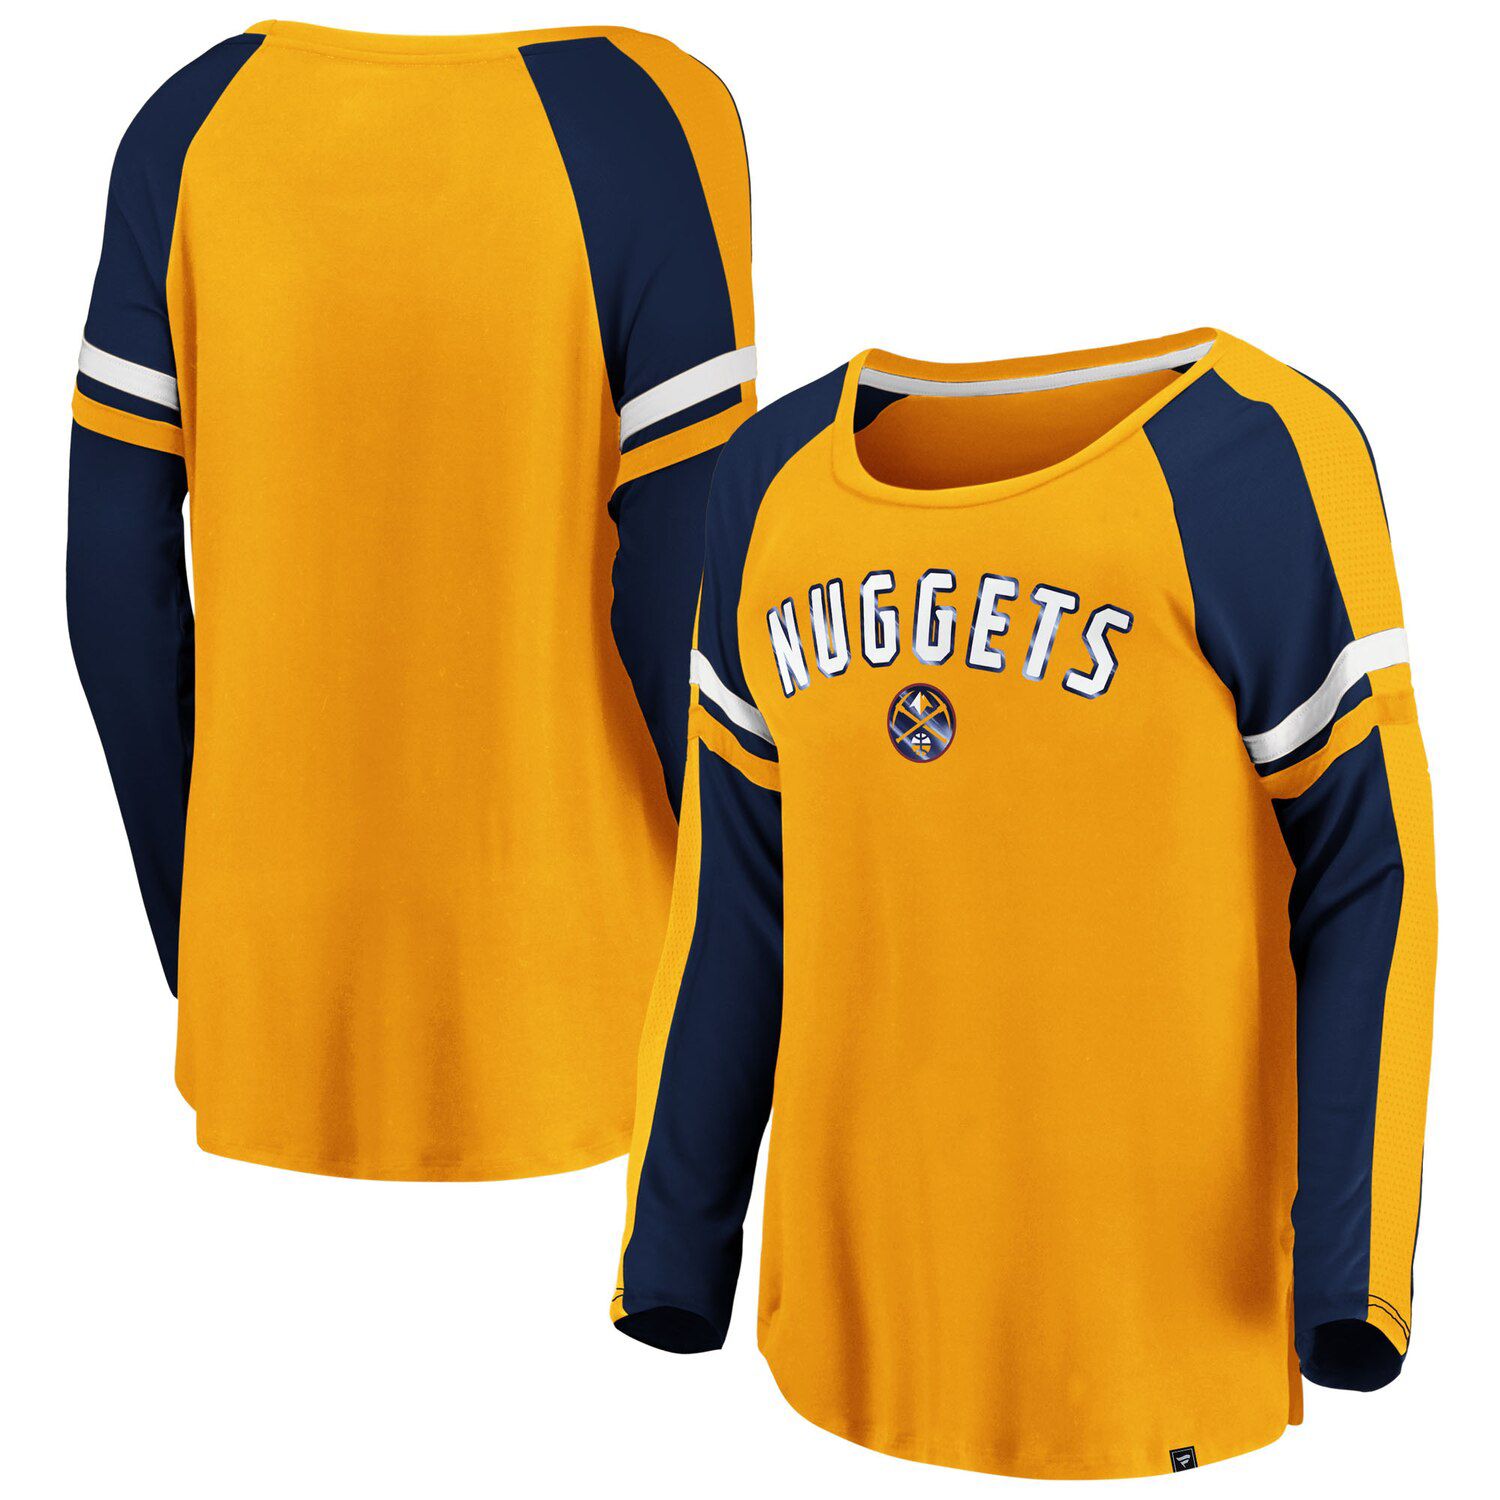 nuggets yellow jersey